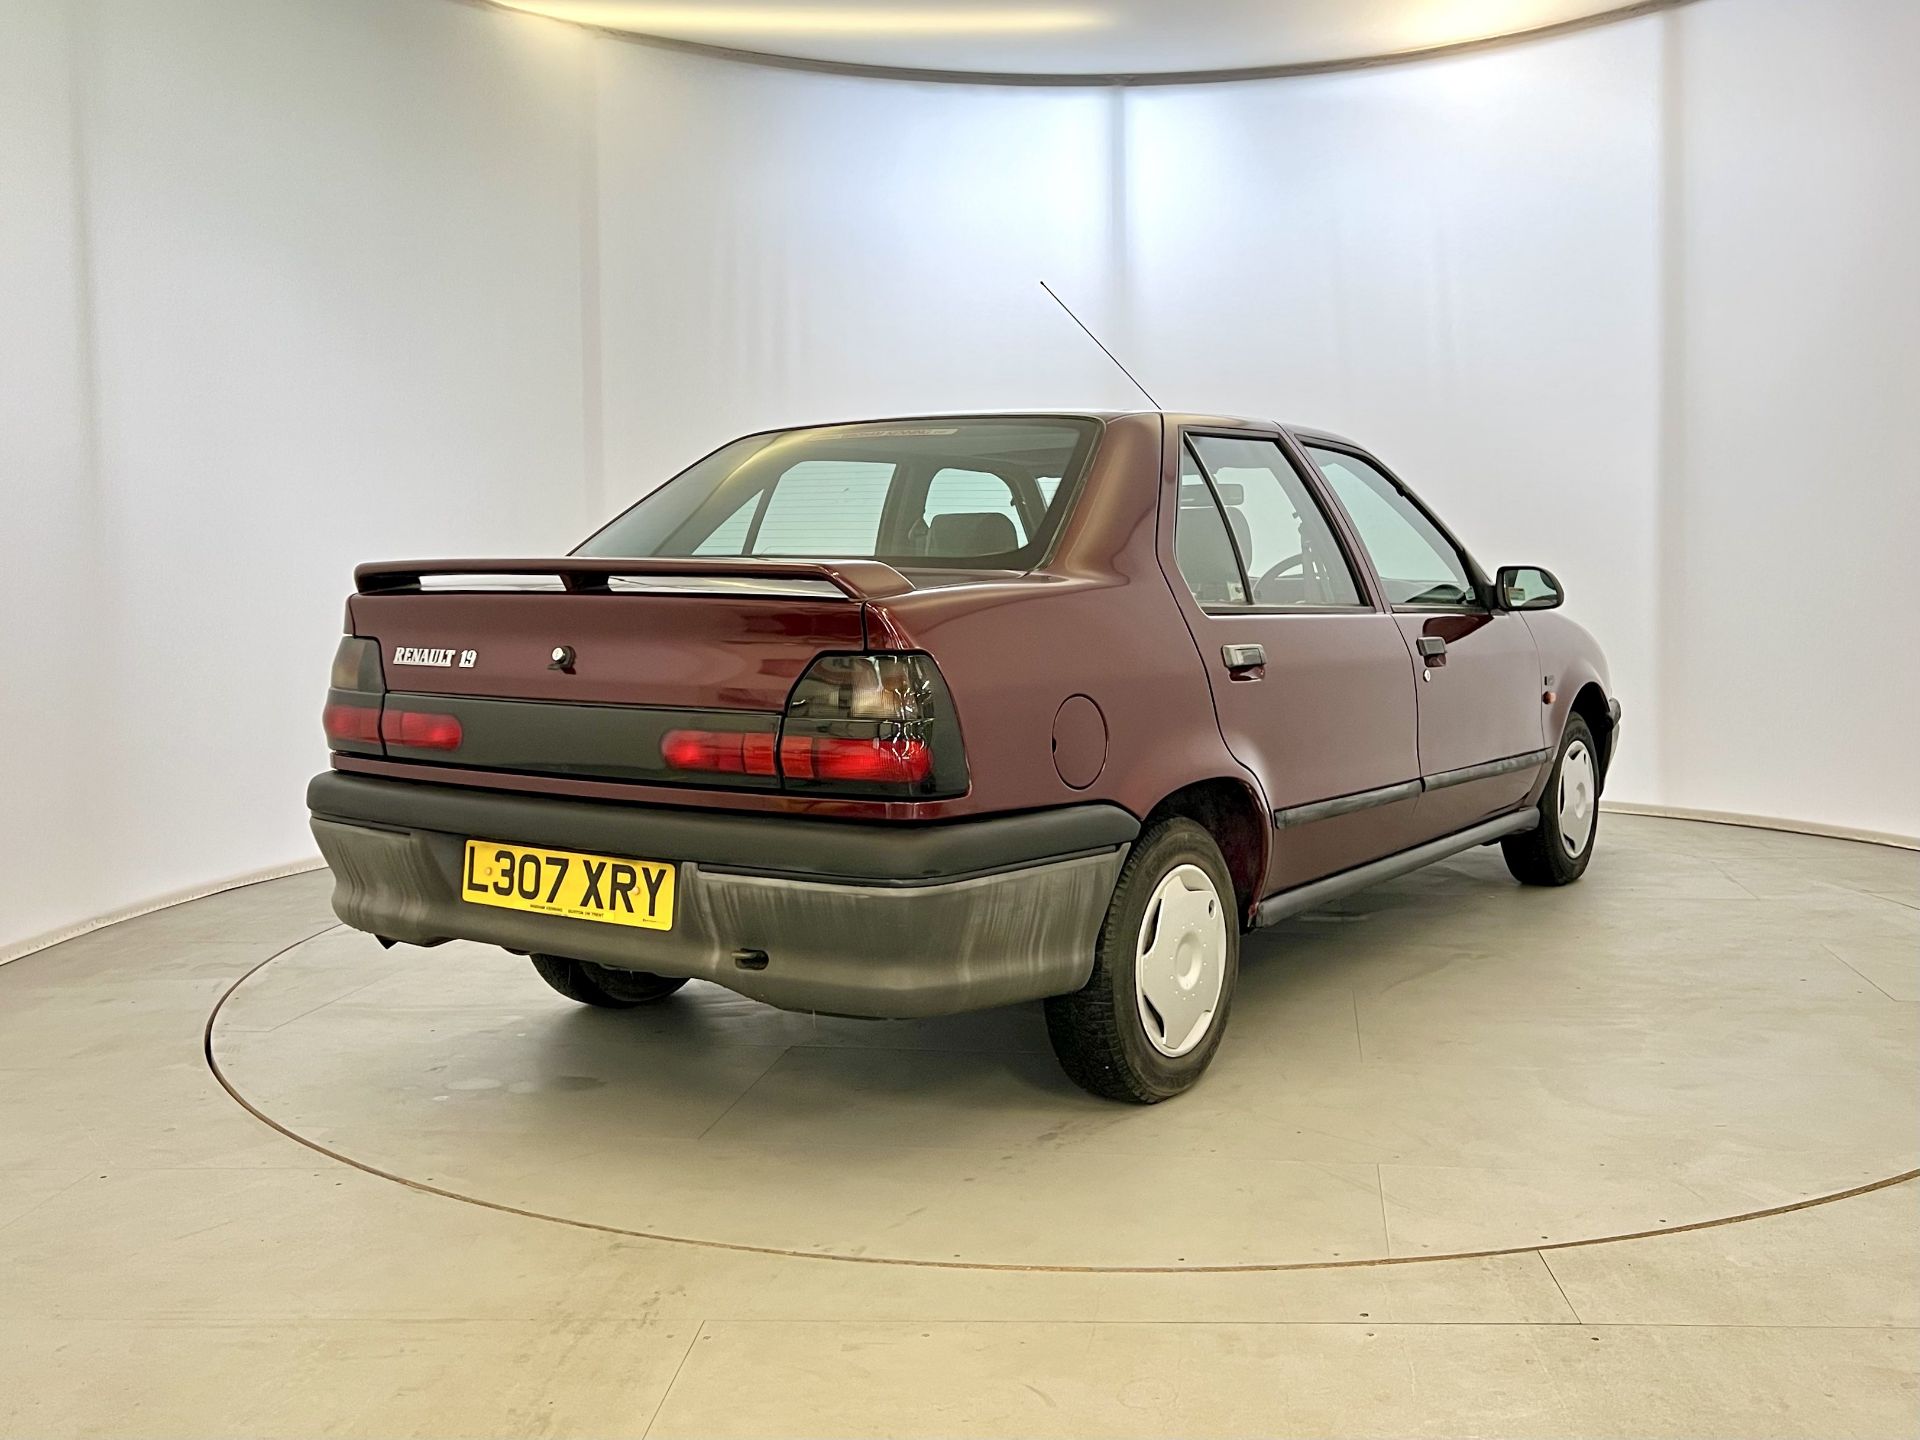 Renault 19 - Image 9 of 38